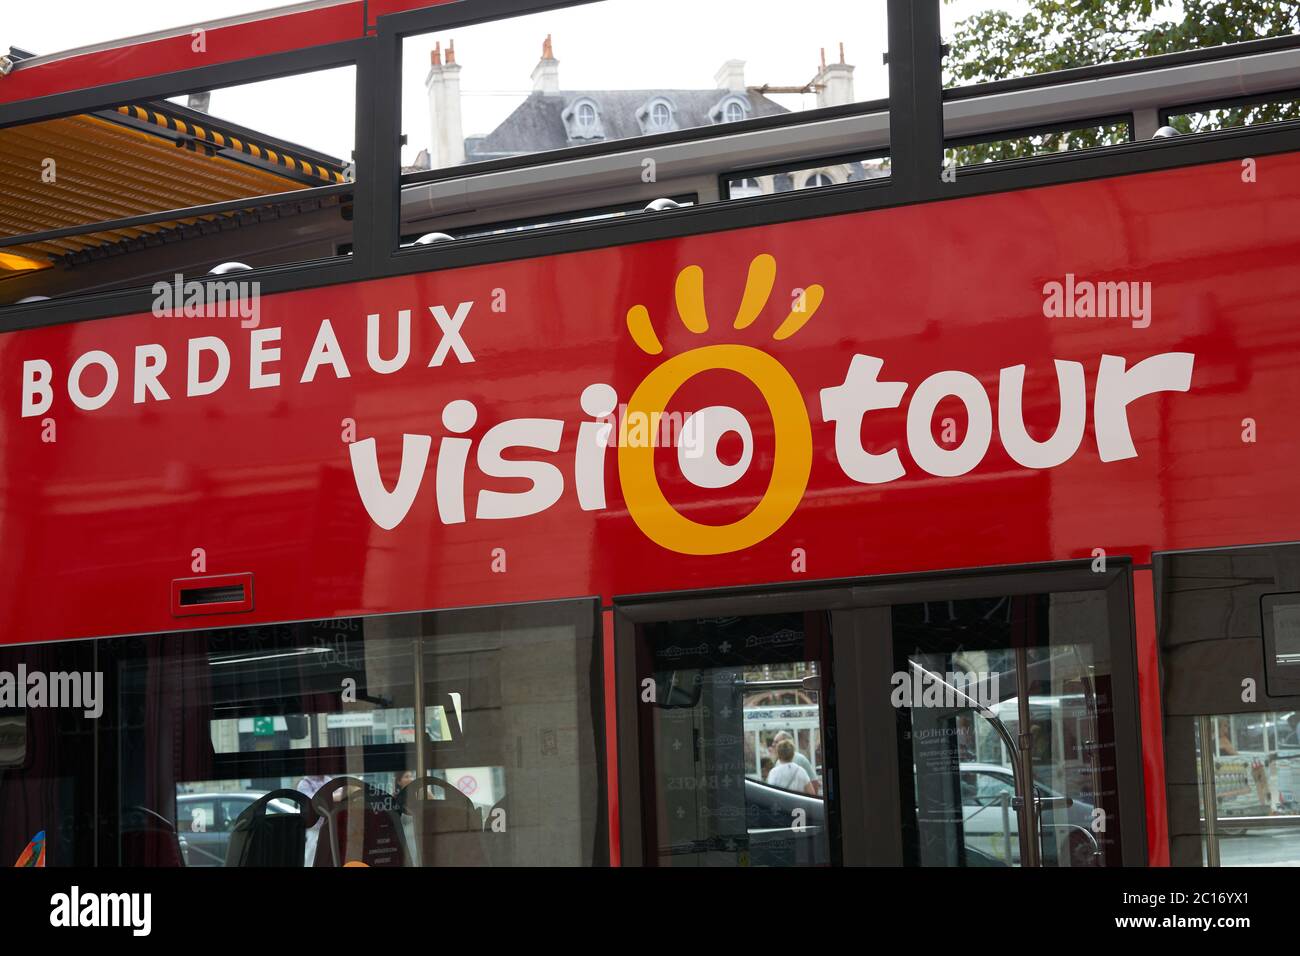 An open-top tourist bus from visiotour to take tourists around Bordeaux city centre Stock Photo